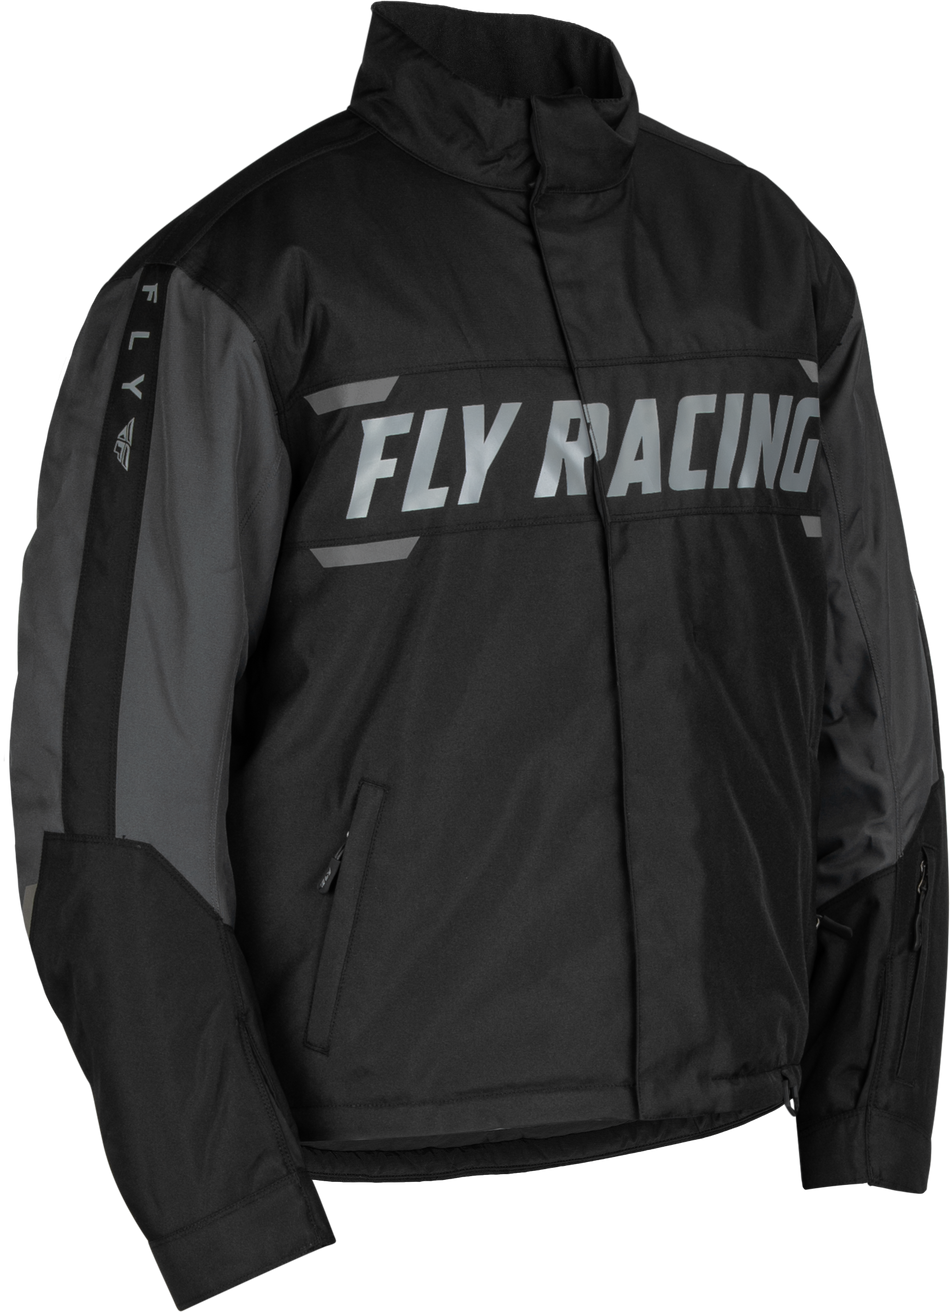 FLY RACING Outpost Jacket Black/Grey Lg 470-5500L